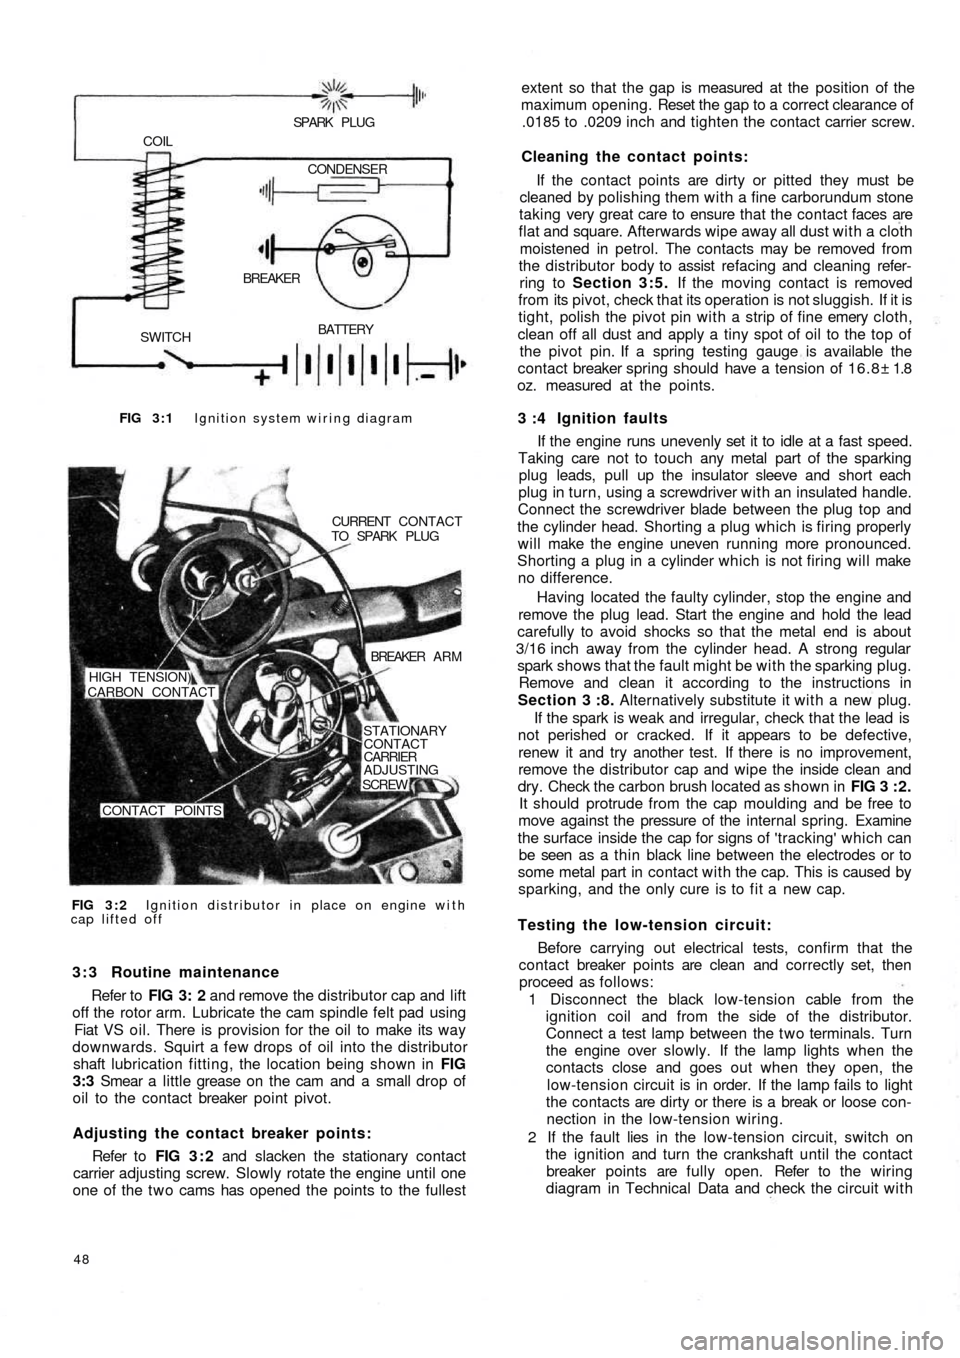 FIAT 500 1969 1.G Workshop Manual FIG 3 : 1 Ignition system wiring diagram
BATTERY
SWITCHBREAKER COIL
SPARK  PLUG
CONDENSER
FIG 3 : 2 Ignition distributor in place on engine with
cap lifted offCURRENT  CONTACT
TO  SPARK  PLUG
BREAKER 